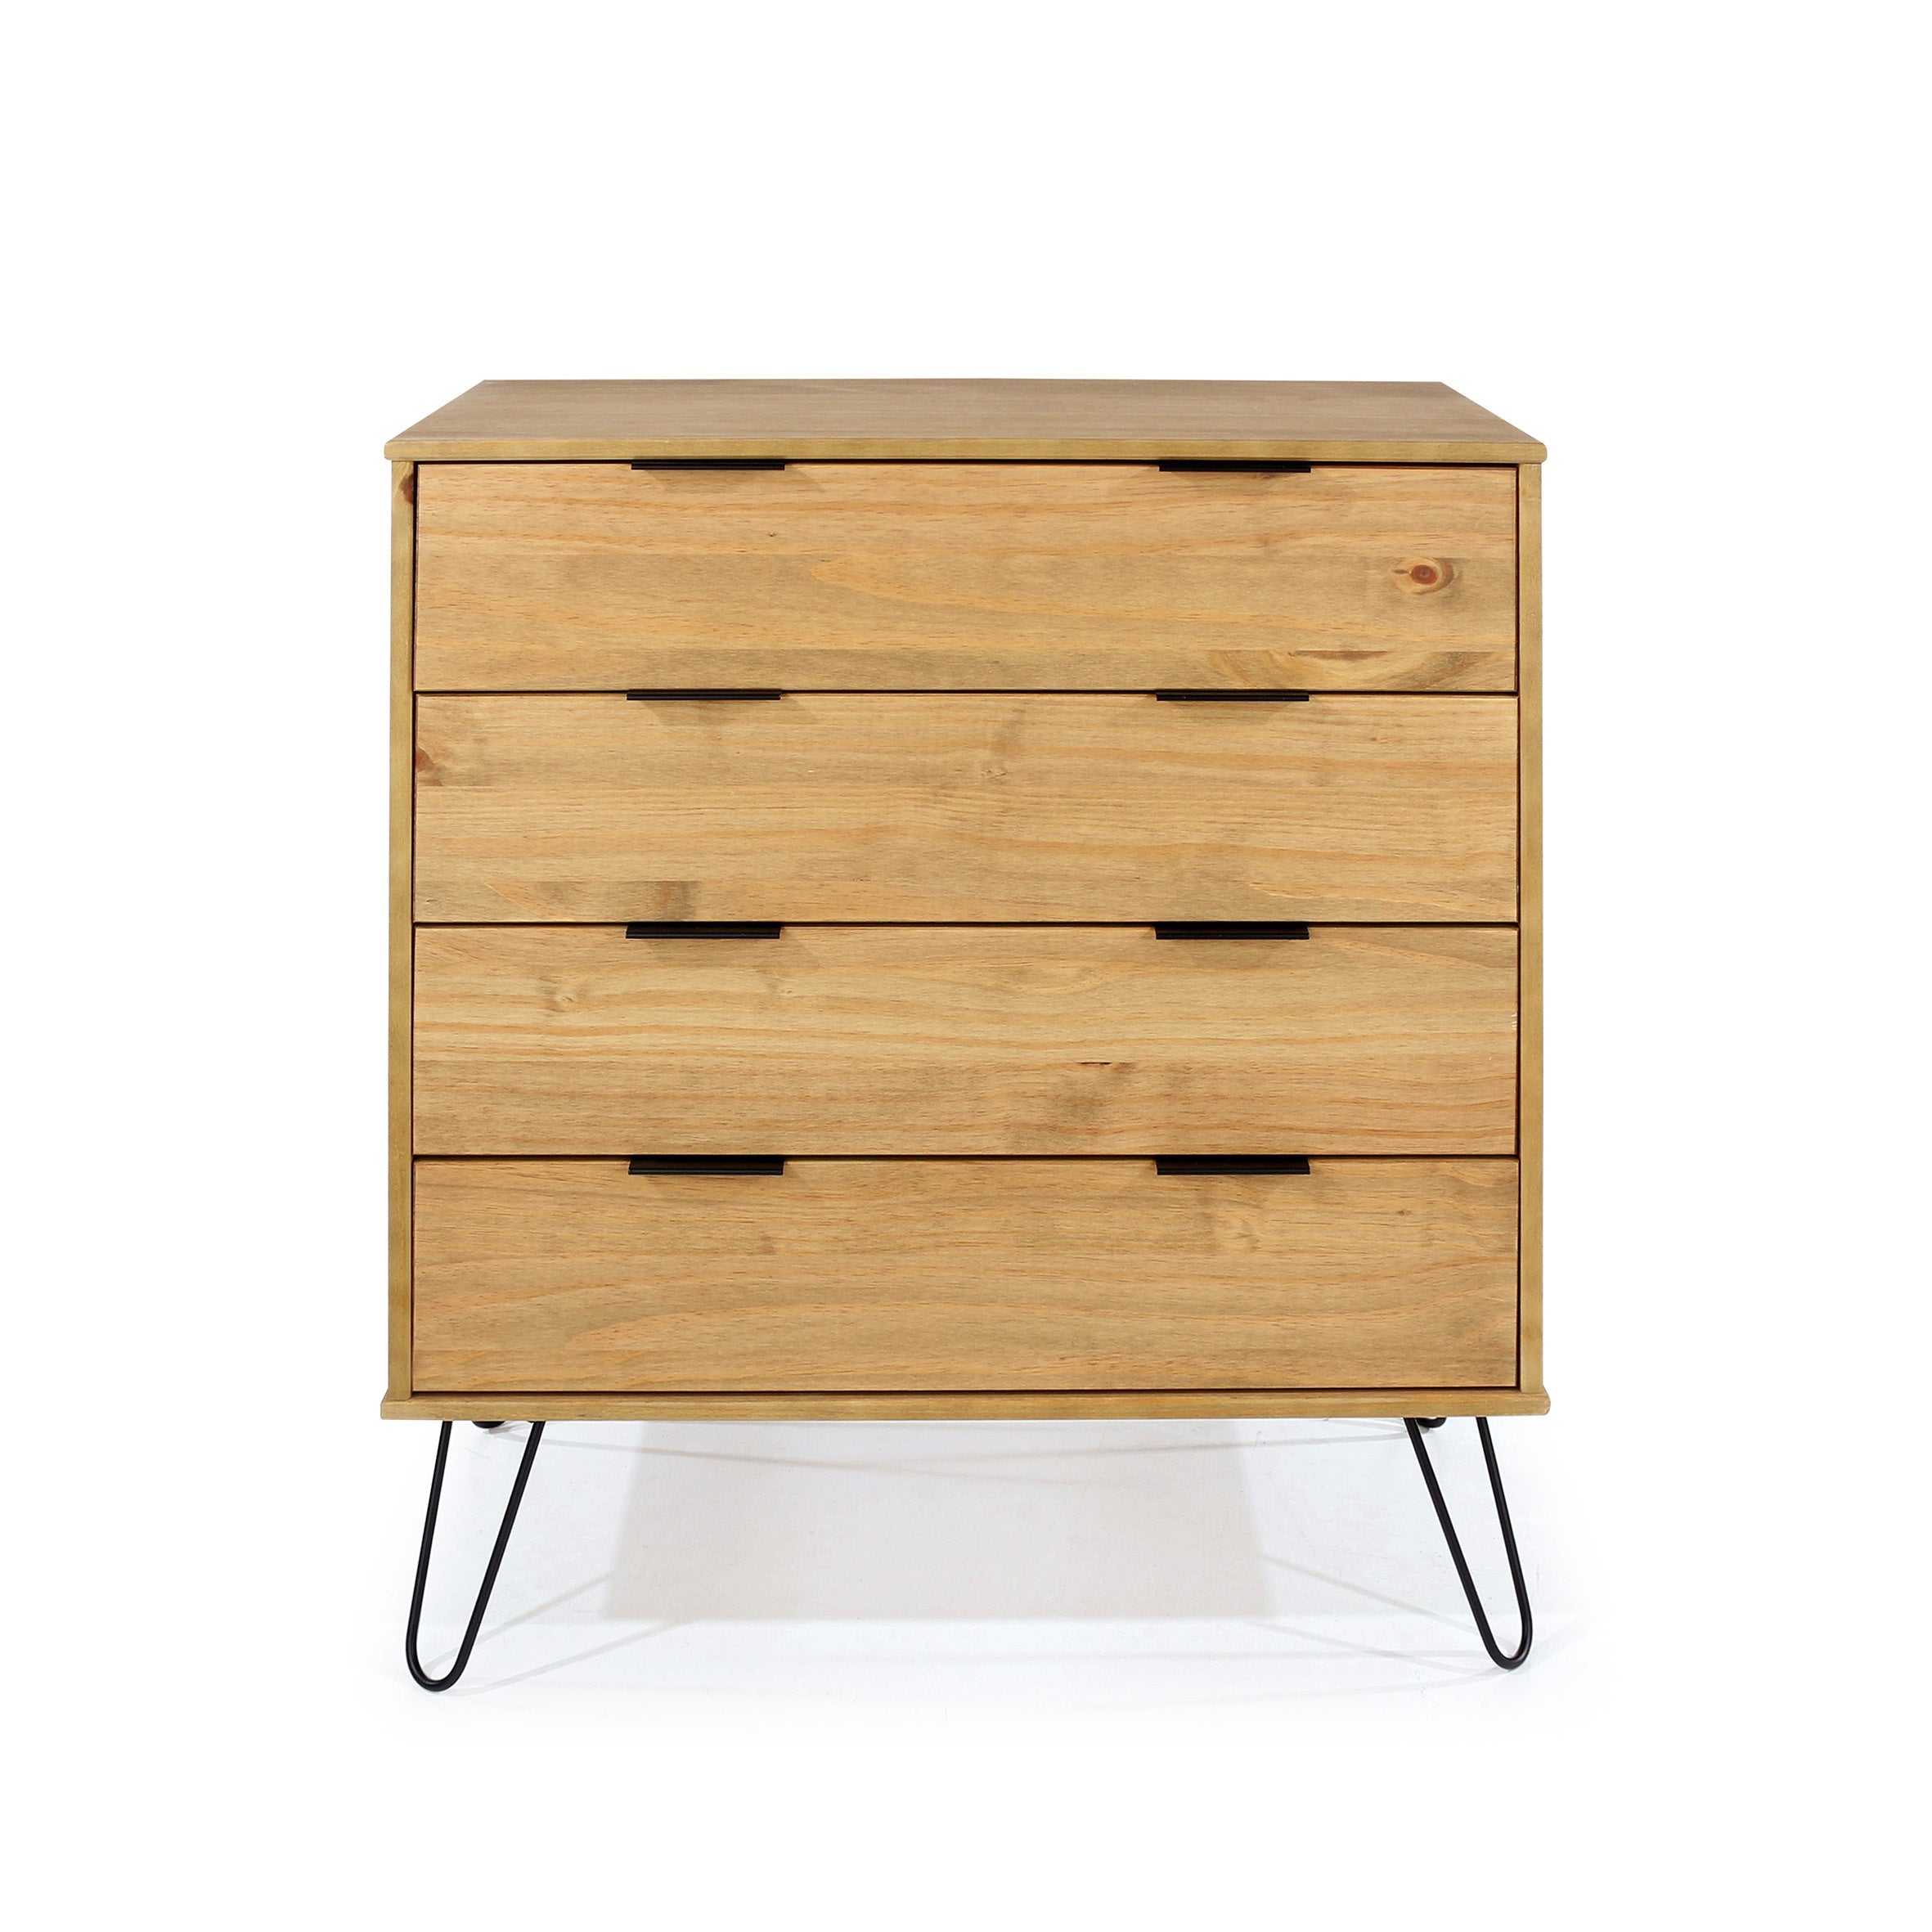 Augusta Pine 4 Drawer Chest With Hairpin Legs